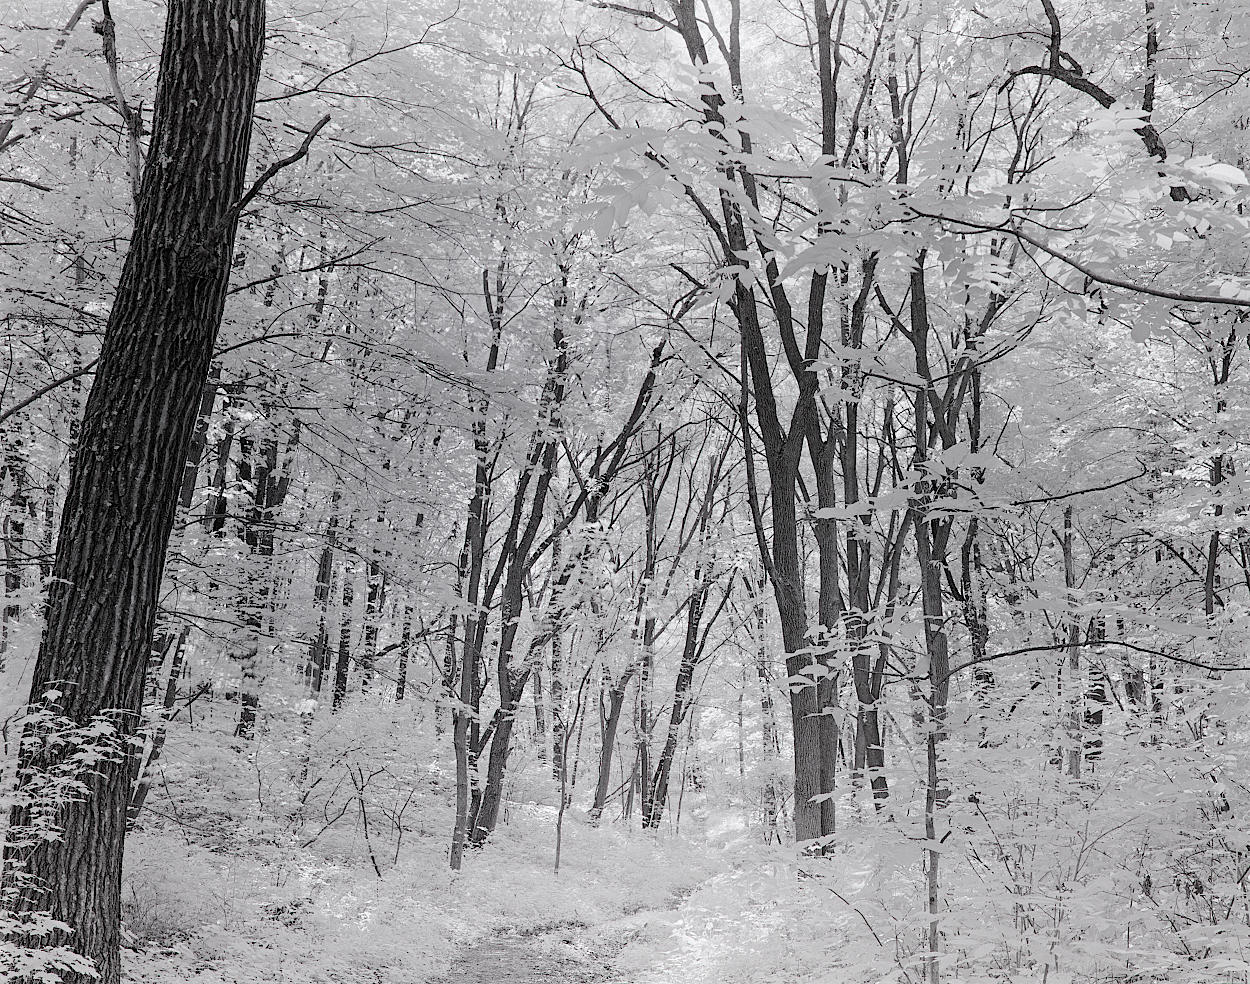 An infrared photo of a slender forest path and glowing underbrush.